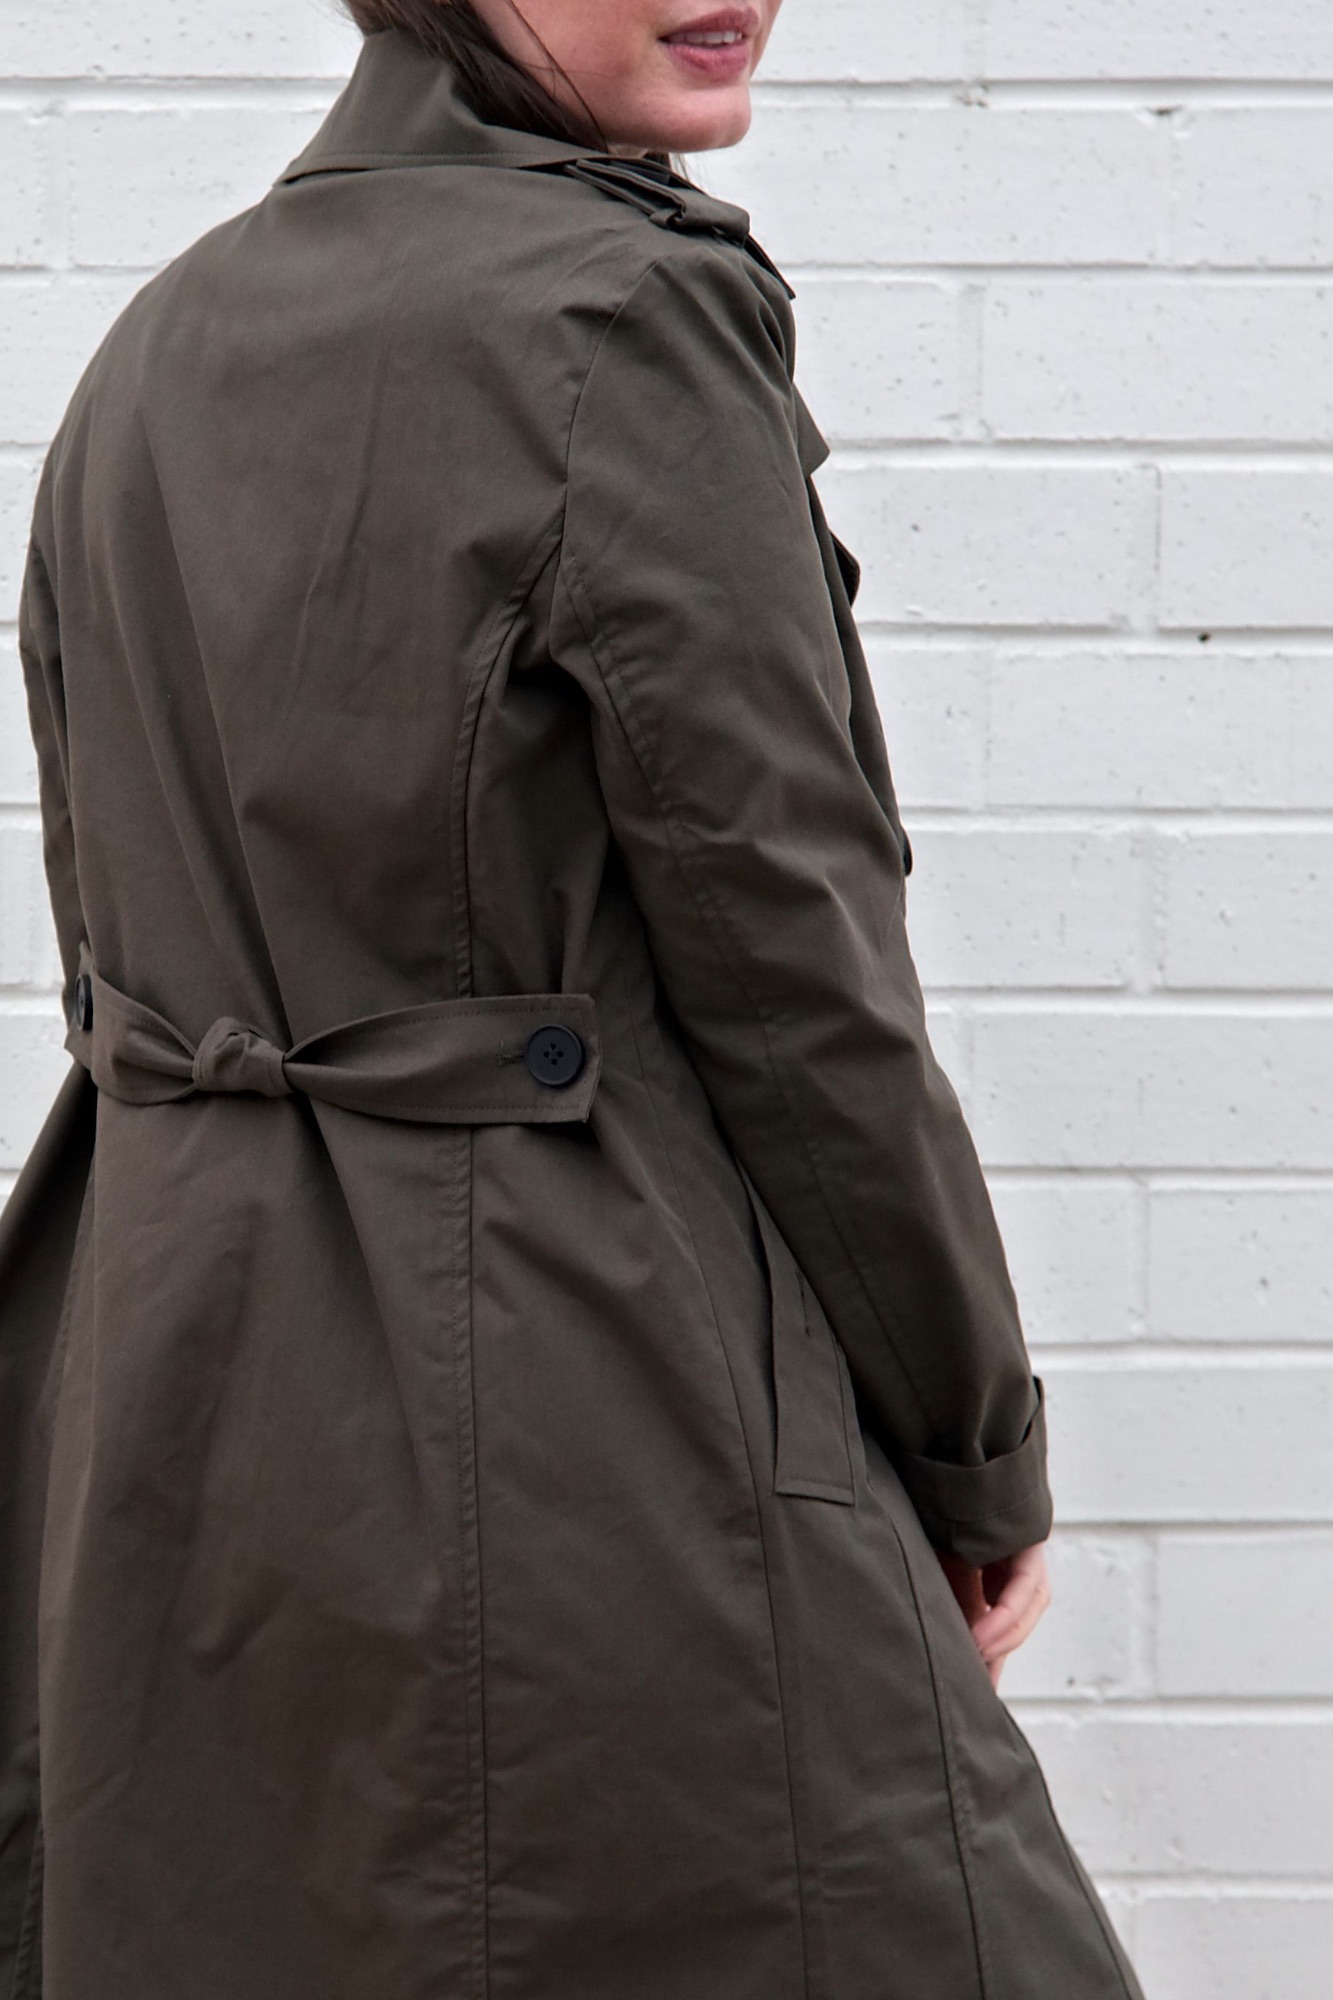 Alyssa turns to show the button belt on the back of the Derjon Trench